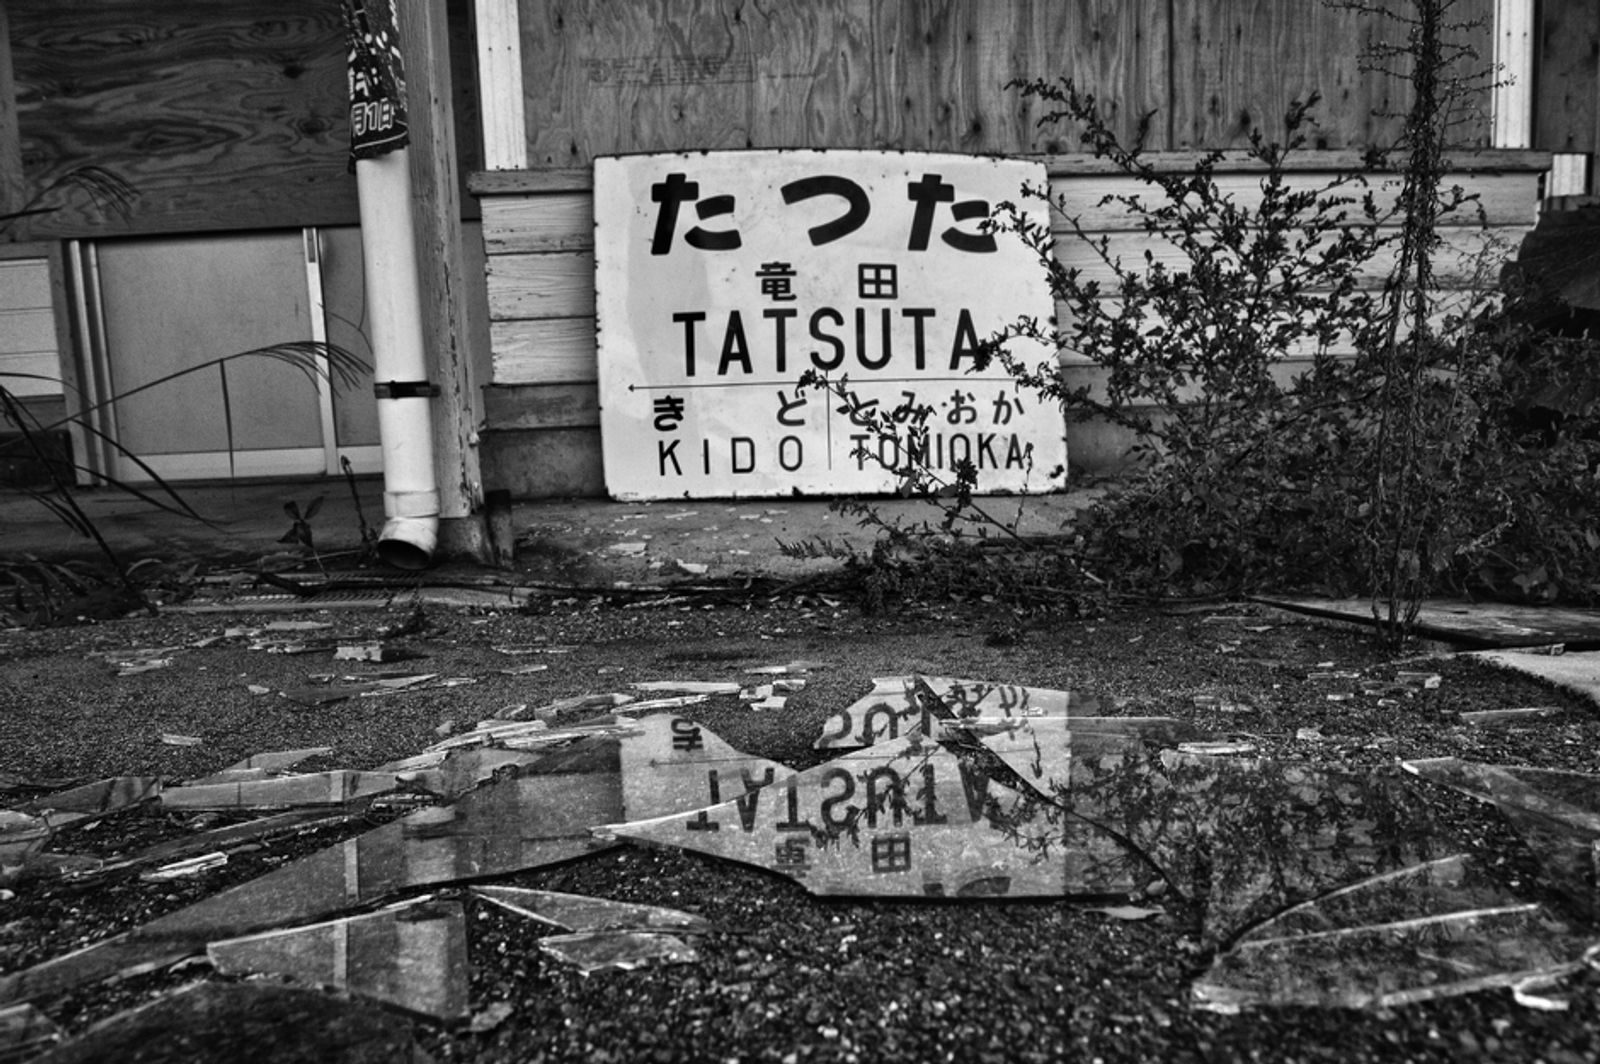 © Pierpaolo Mittica - Image from the Fukushima No-Go Zone photography project